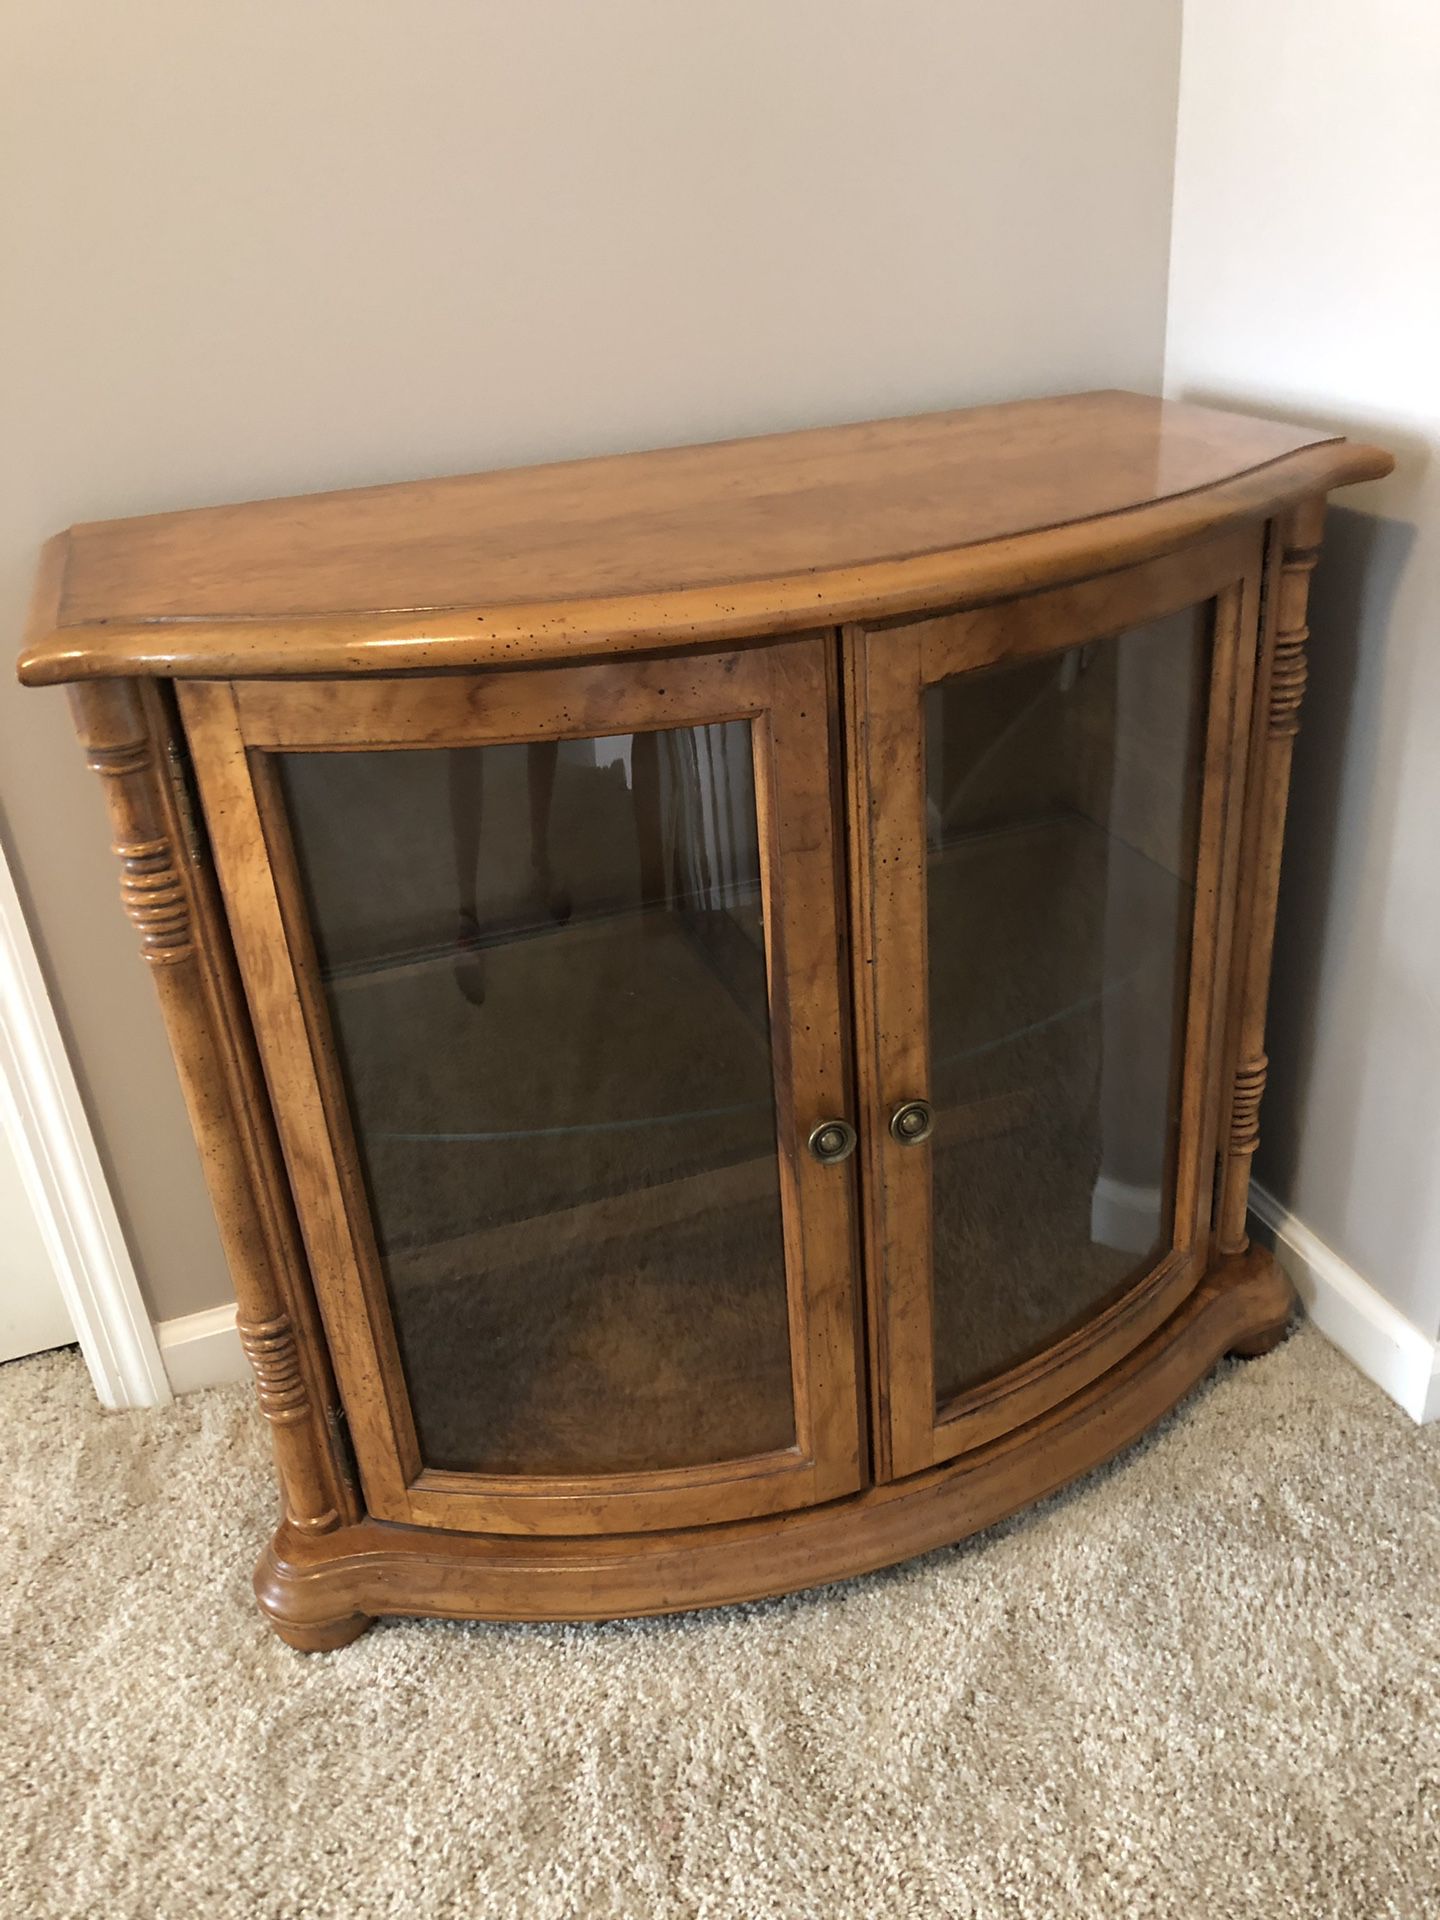 Excellent condition Solid wood cabinet $35